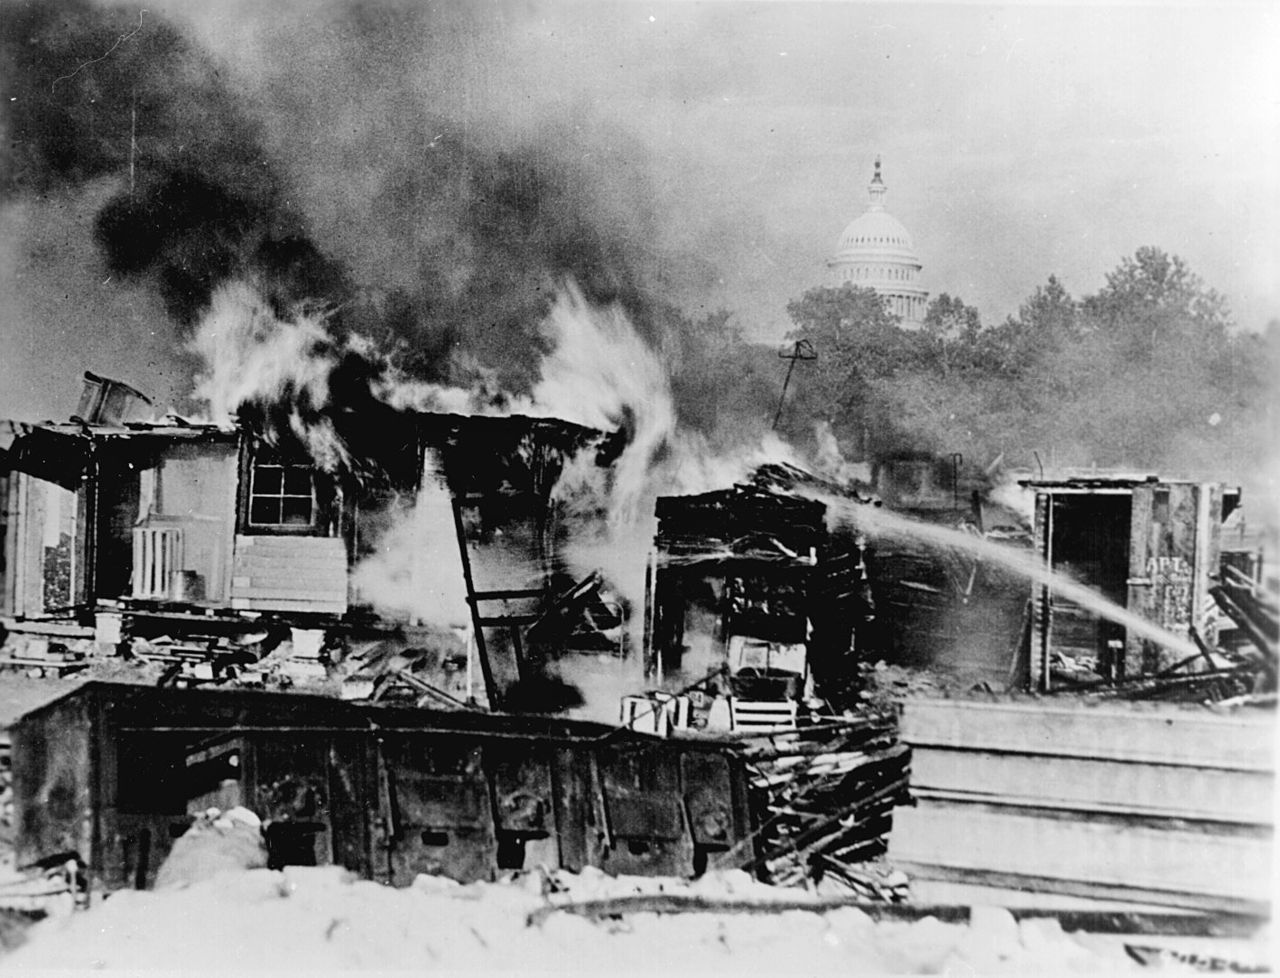 Shacks, put up by the Bonus Army on the Anacostia flats, Washington, D.C., burning after the battle with the military. The Capitol in the background. 1932. (Public Domain)